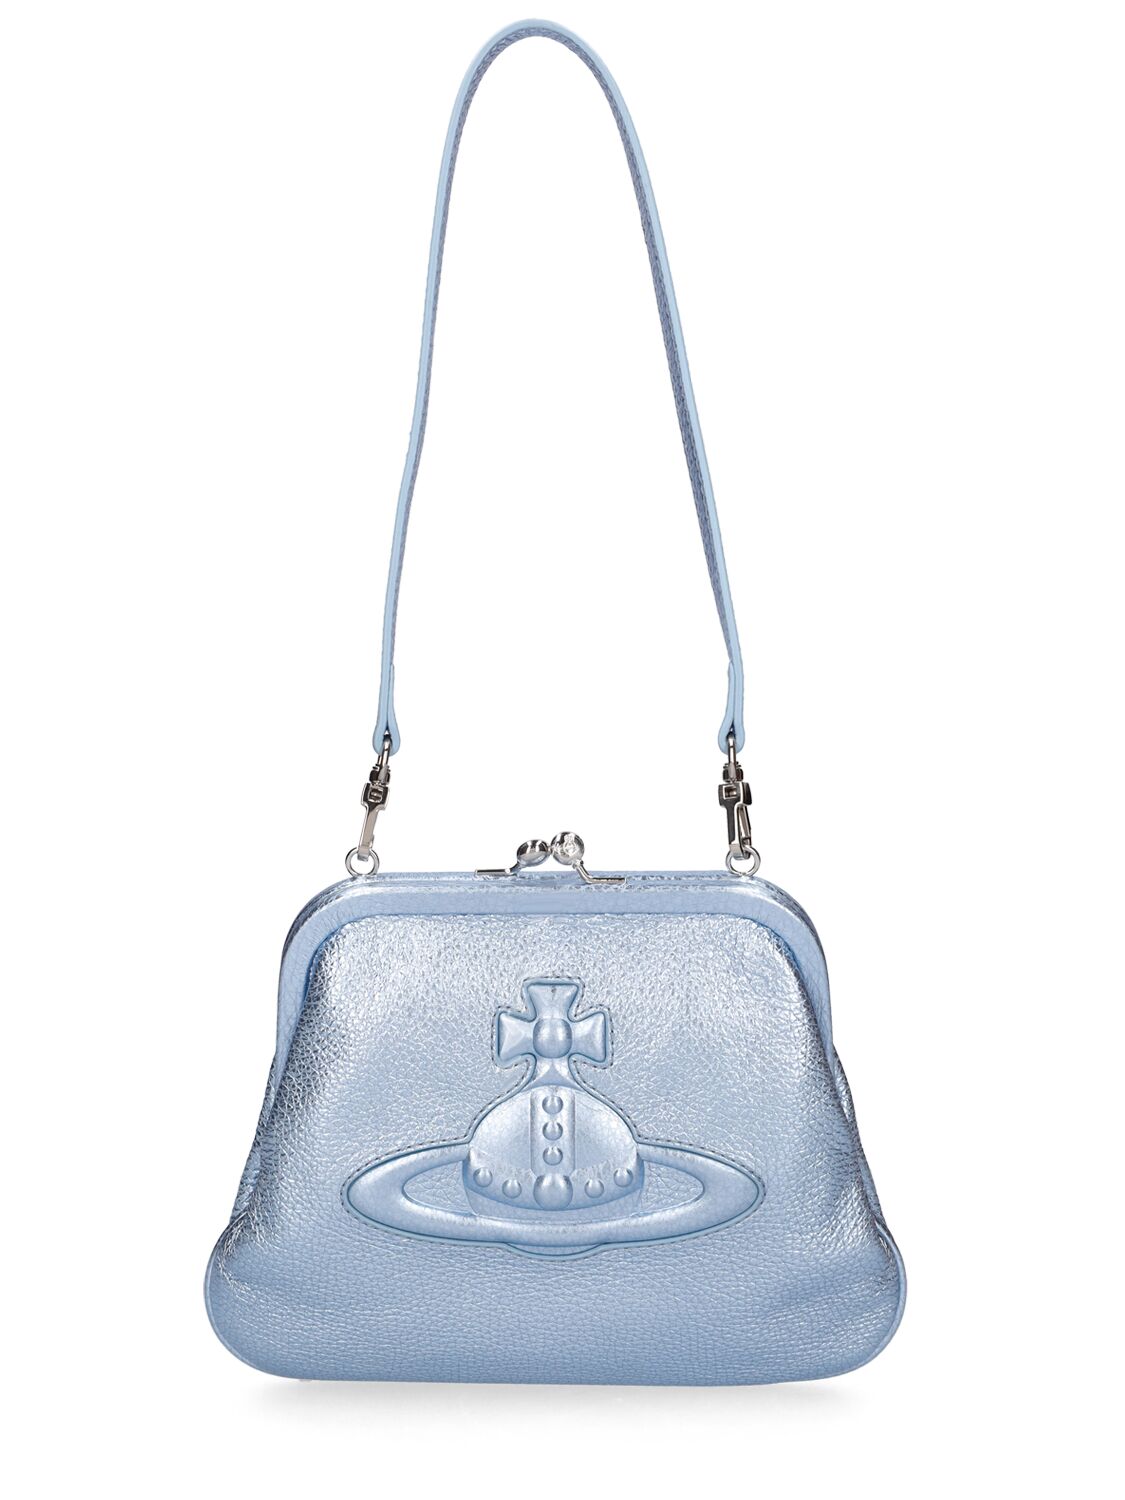 Vivienne Westwood Vivienne Injected Orb Leather Clutch In Light Blue